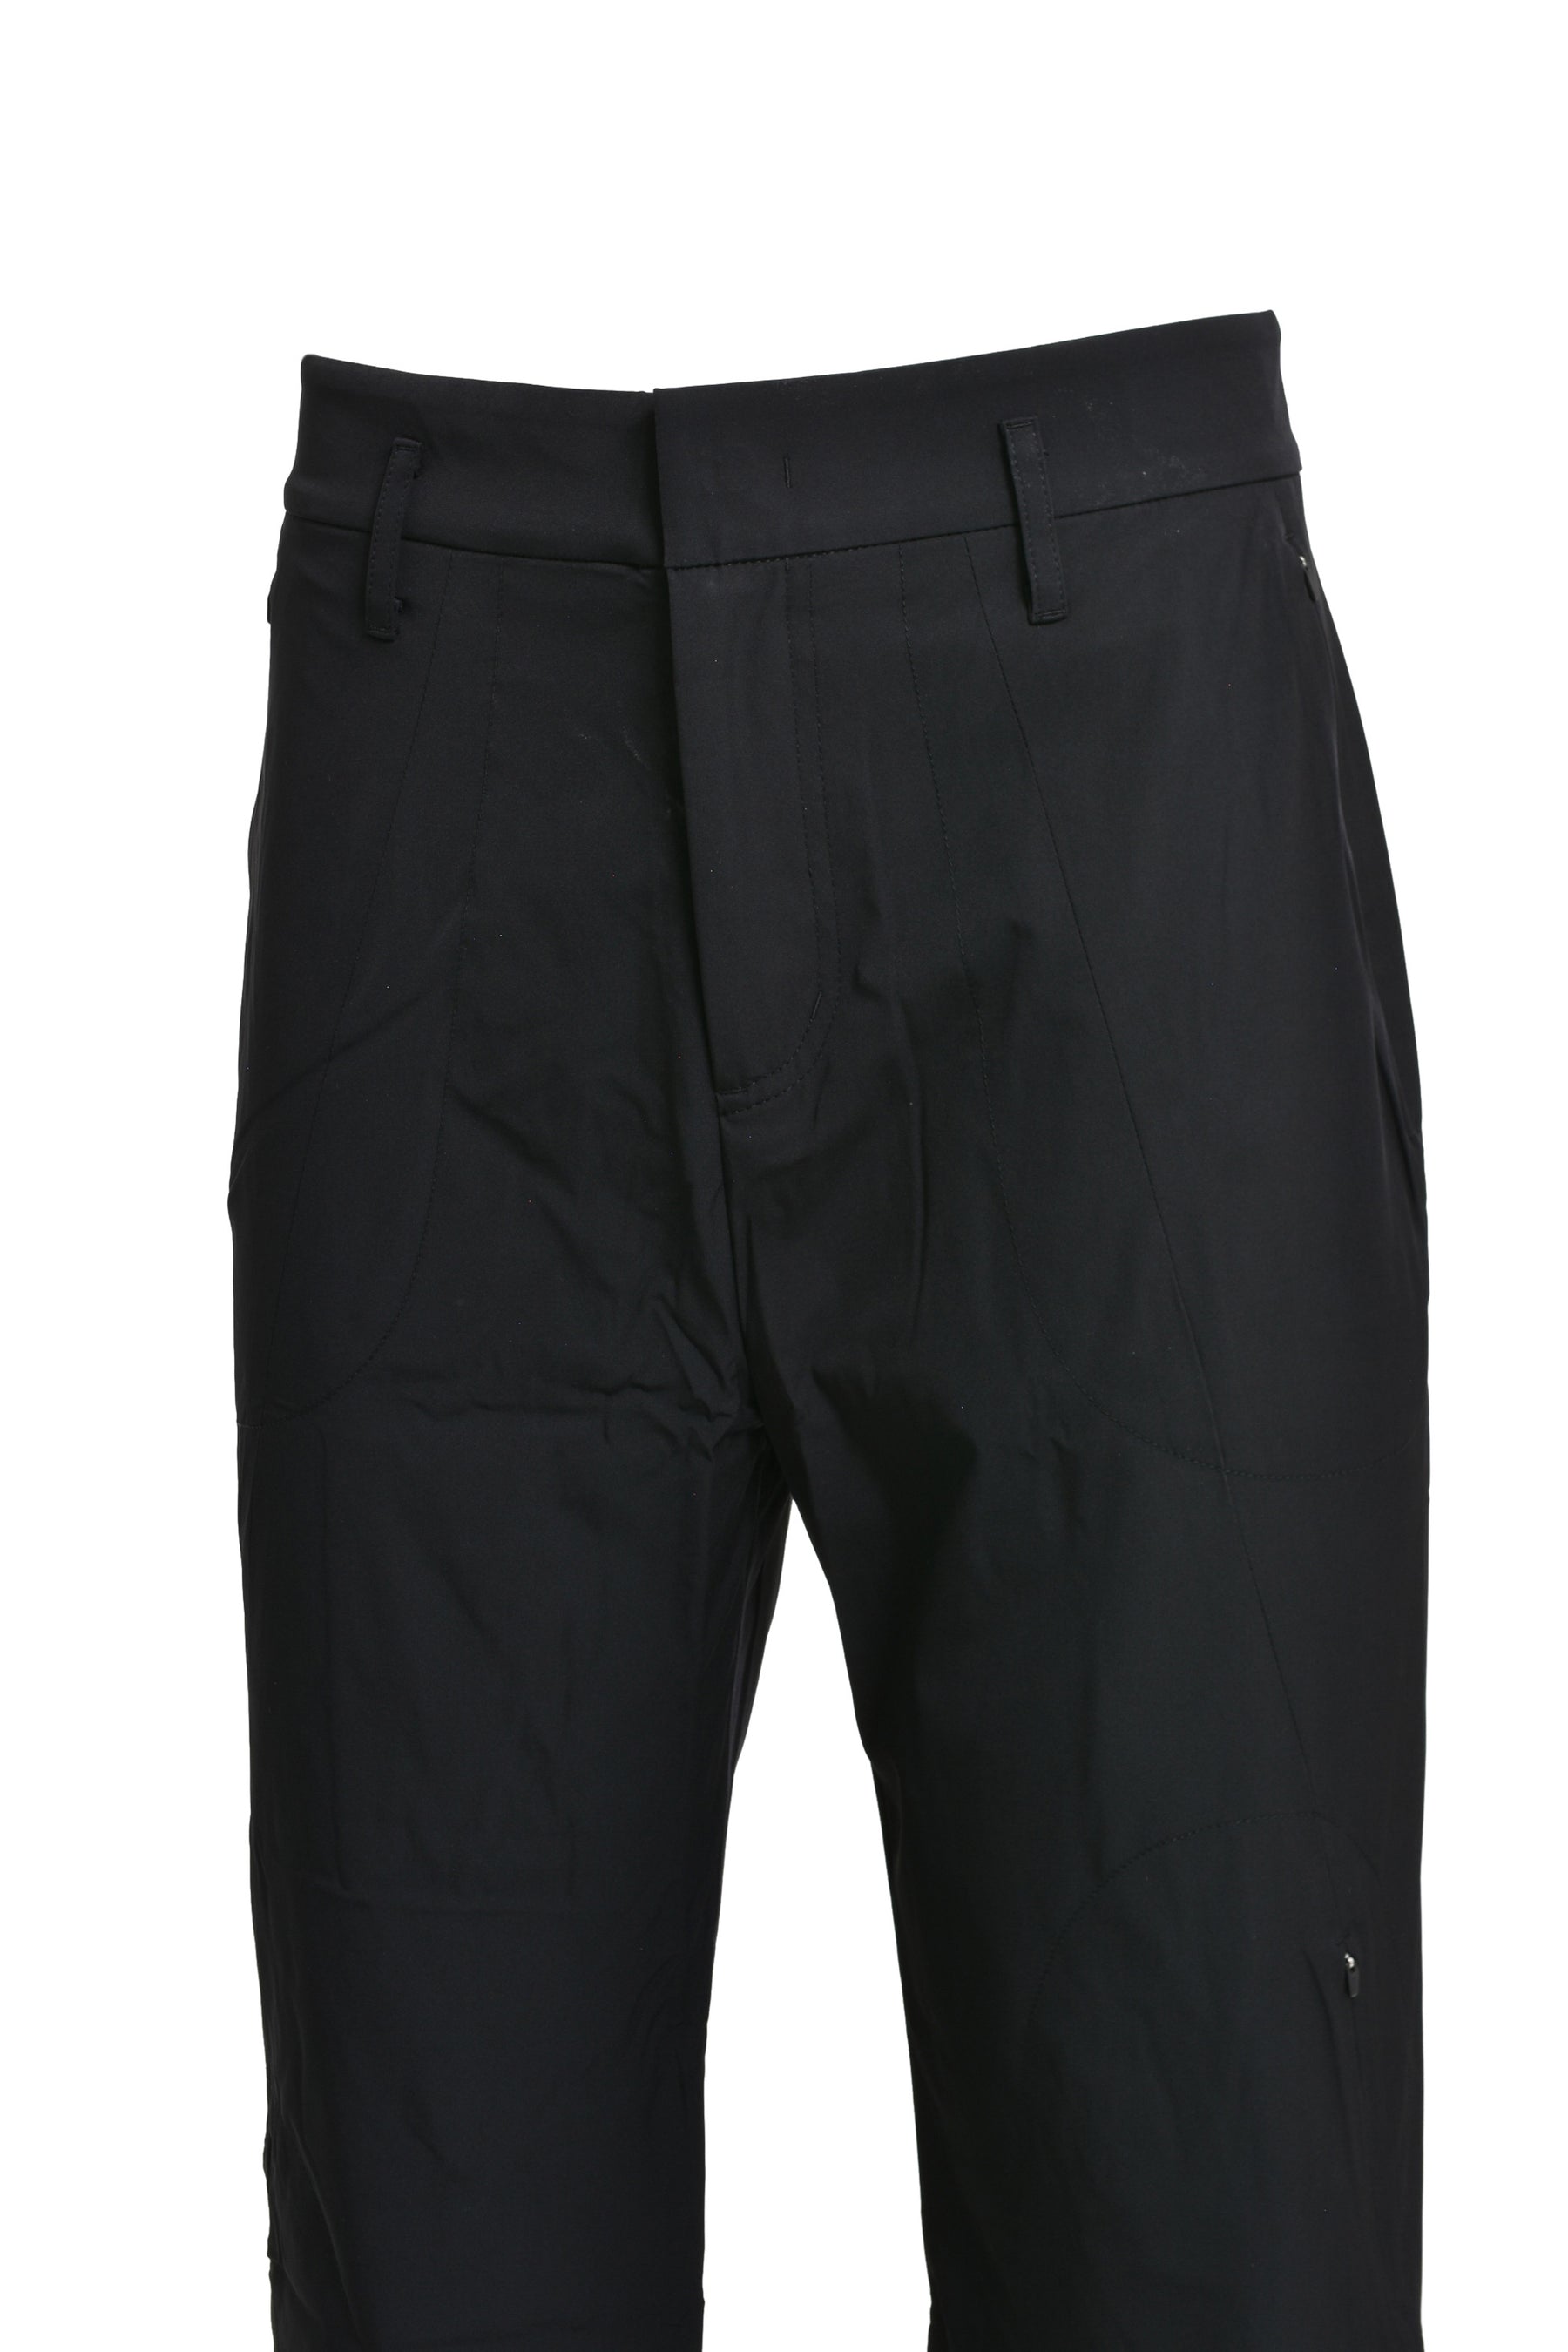 POST ARCHIVE FACTION (PAF) 5.1 TROUSERS CENTER / BLK